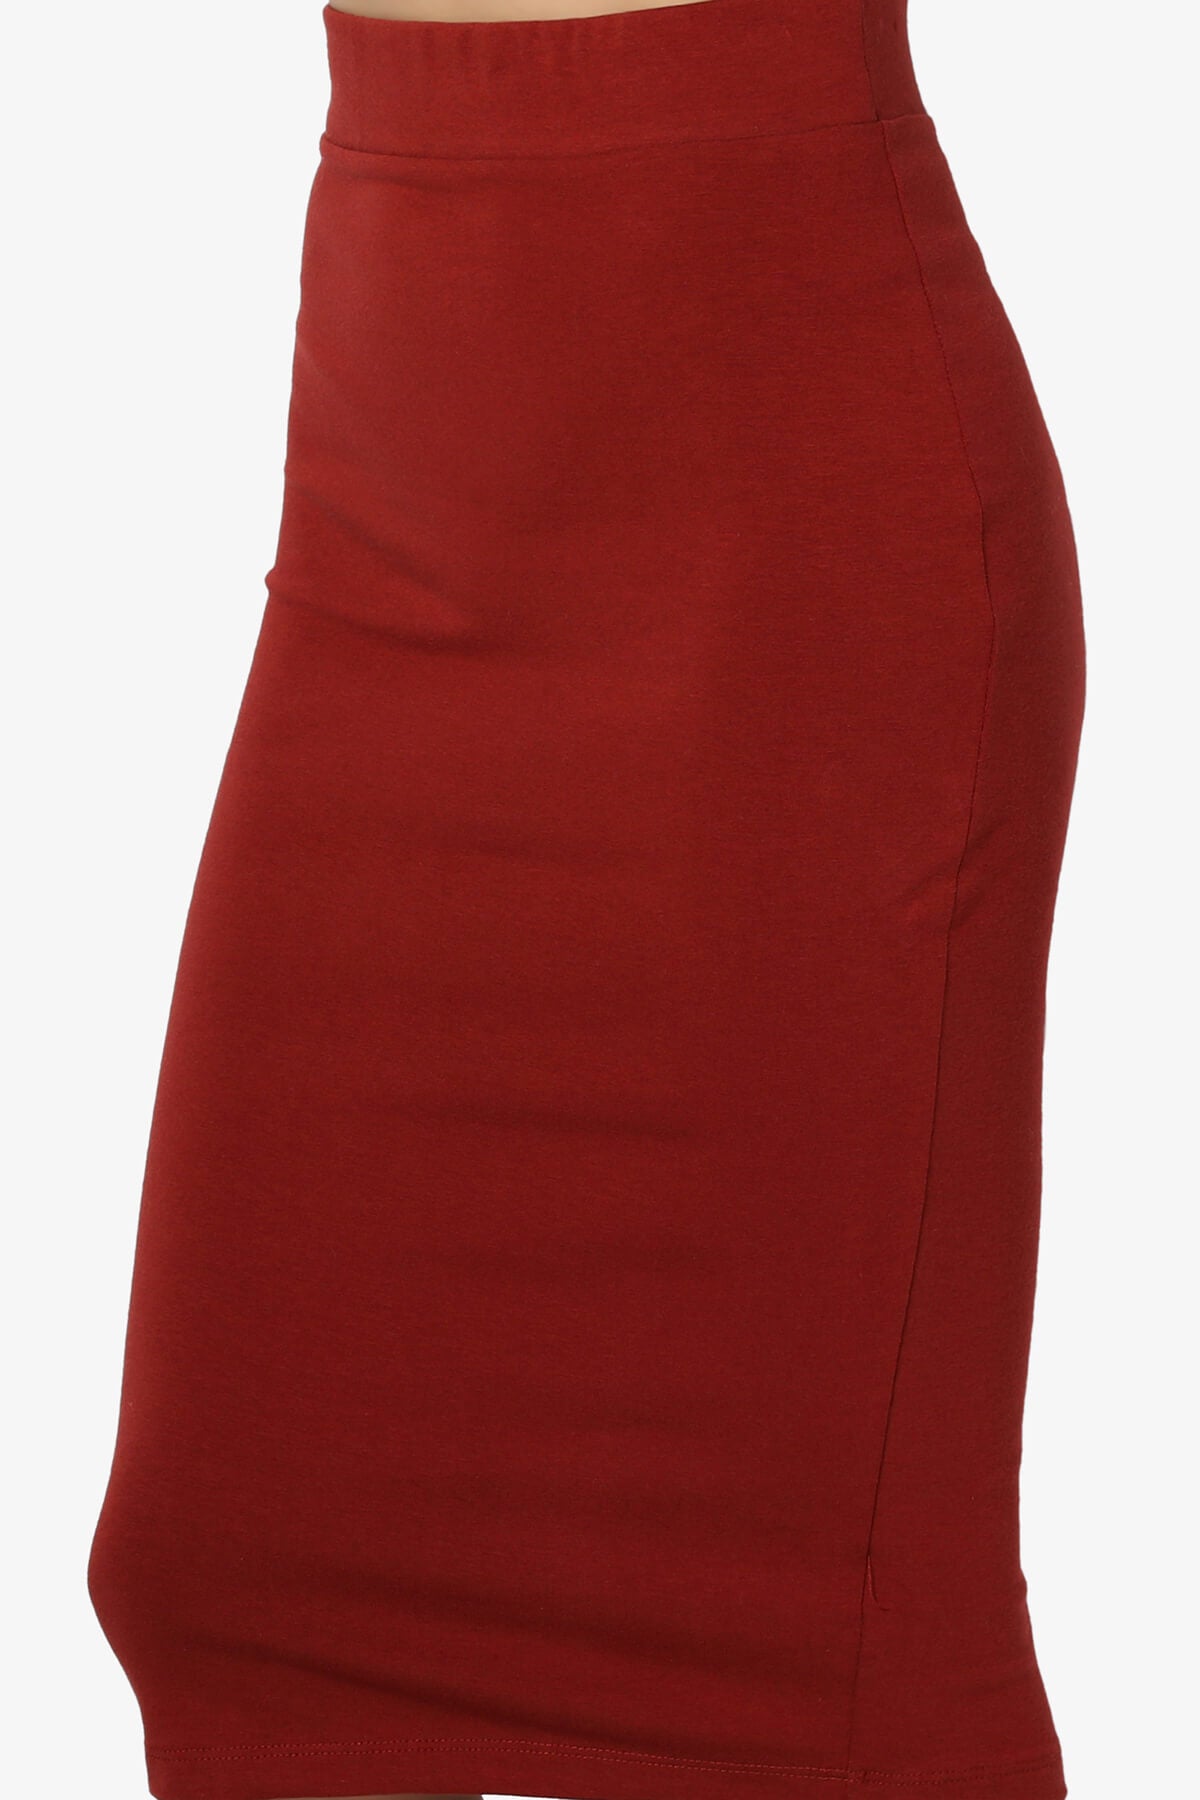 Load image into Gallery viewer, Karan Cotton Midi Pencil Skirt COPPER RED_5
